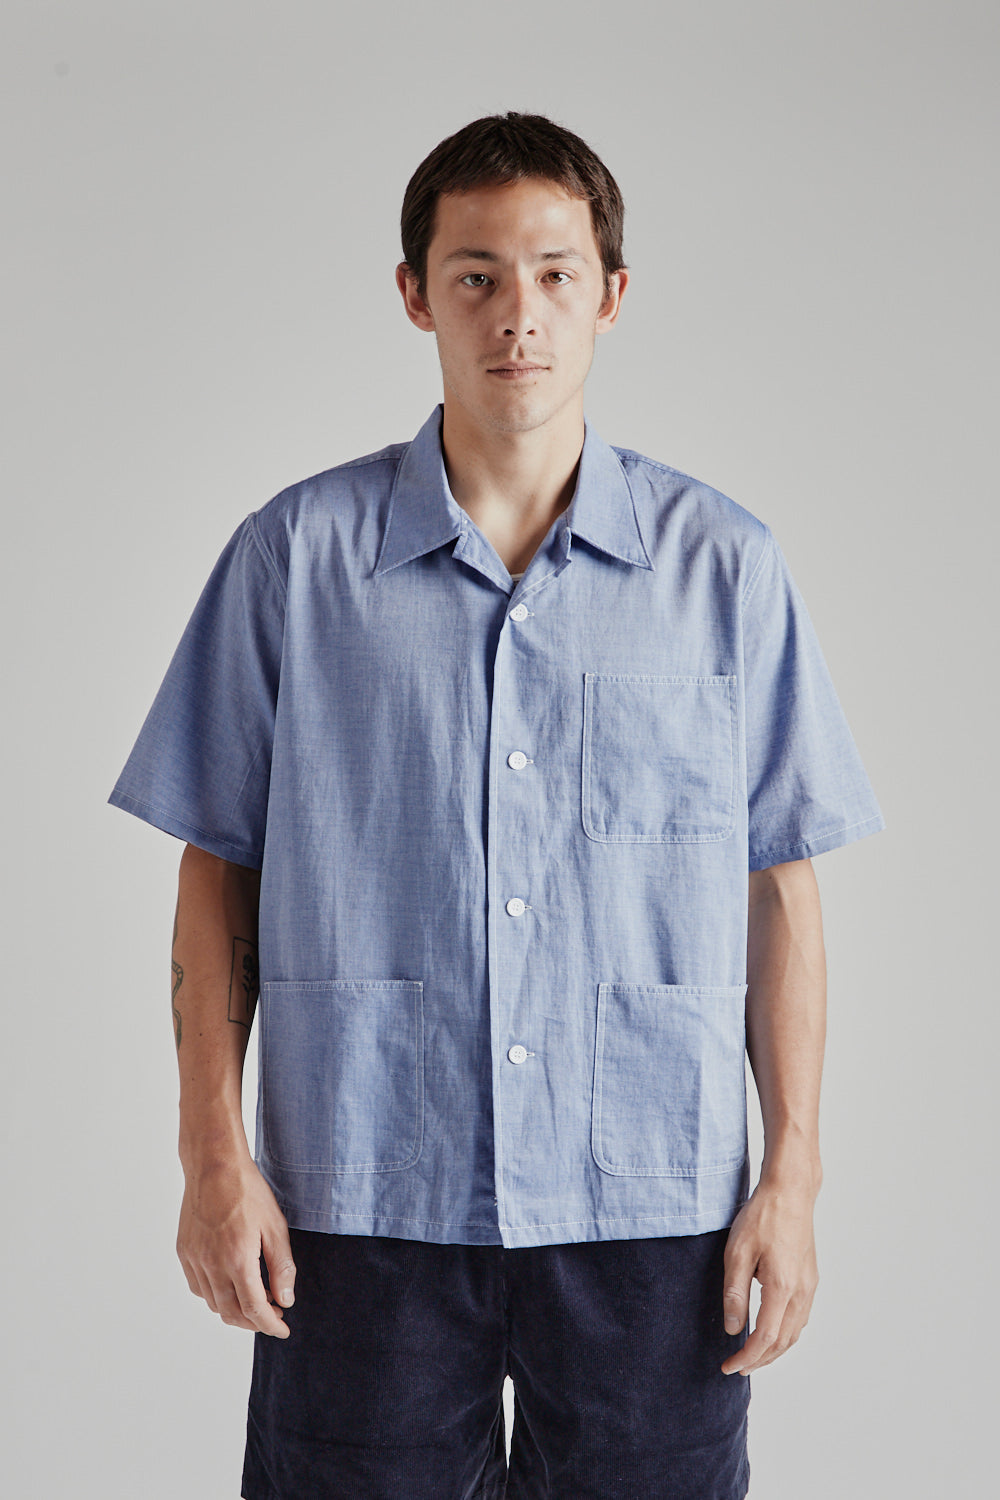 Brother Brother 3 Pocket Shirt in Navy Chambray